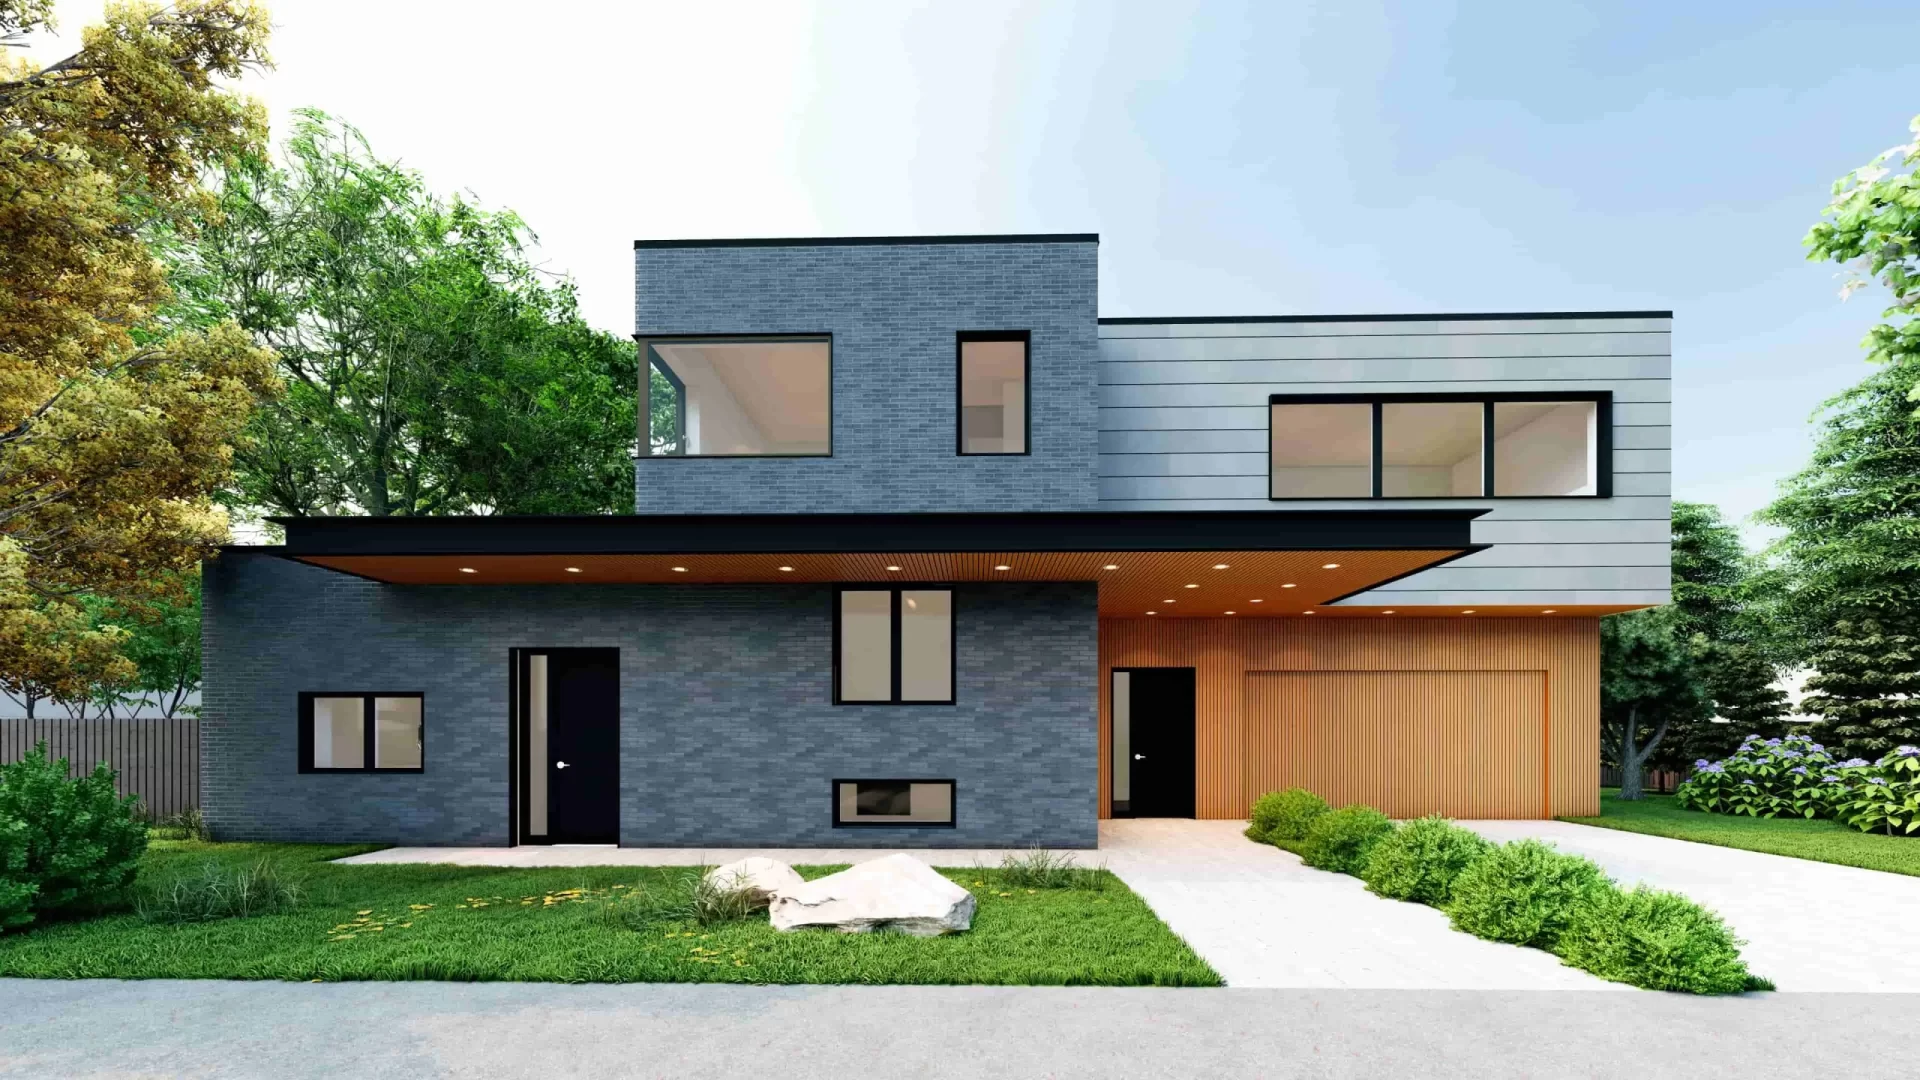 Boldera Architects - Residential Architects in Toronto - Modern Architecture.